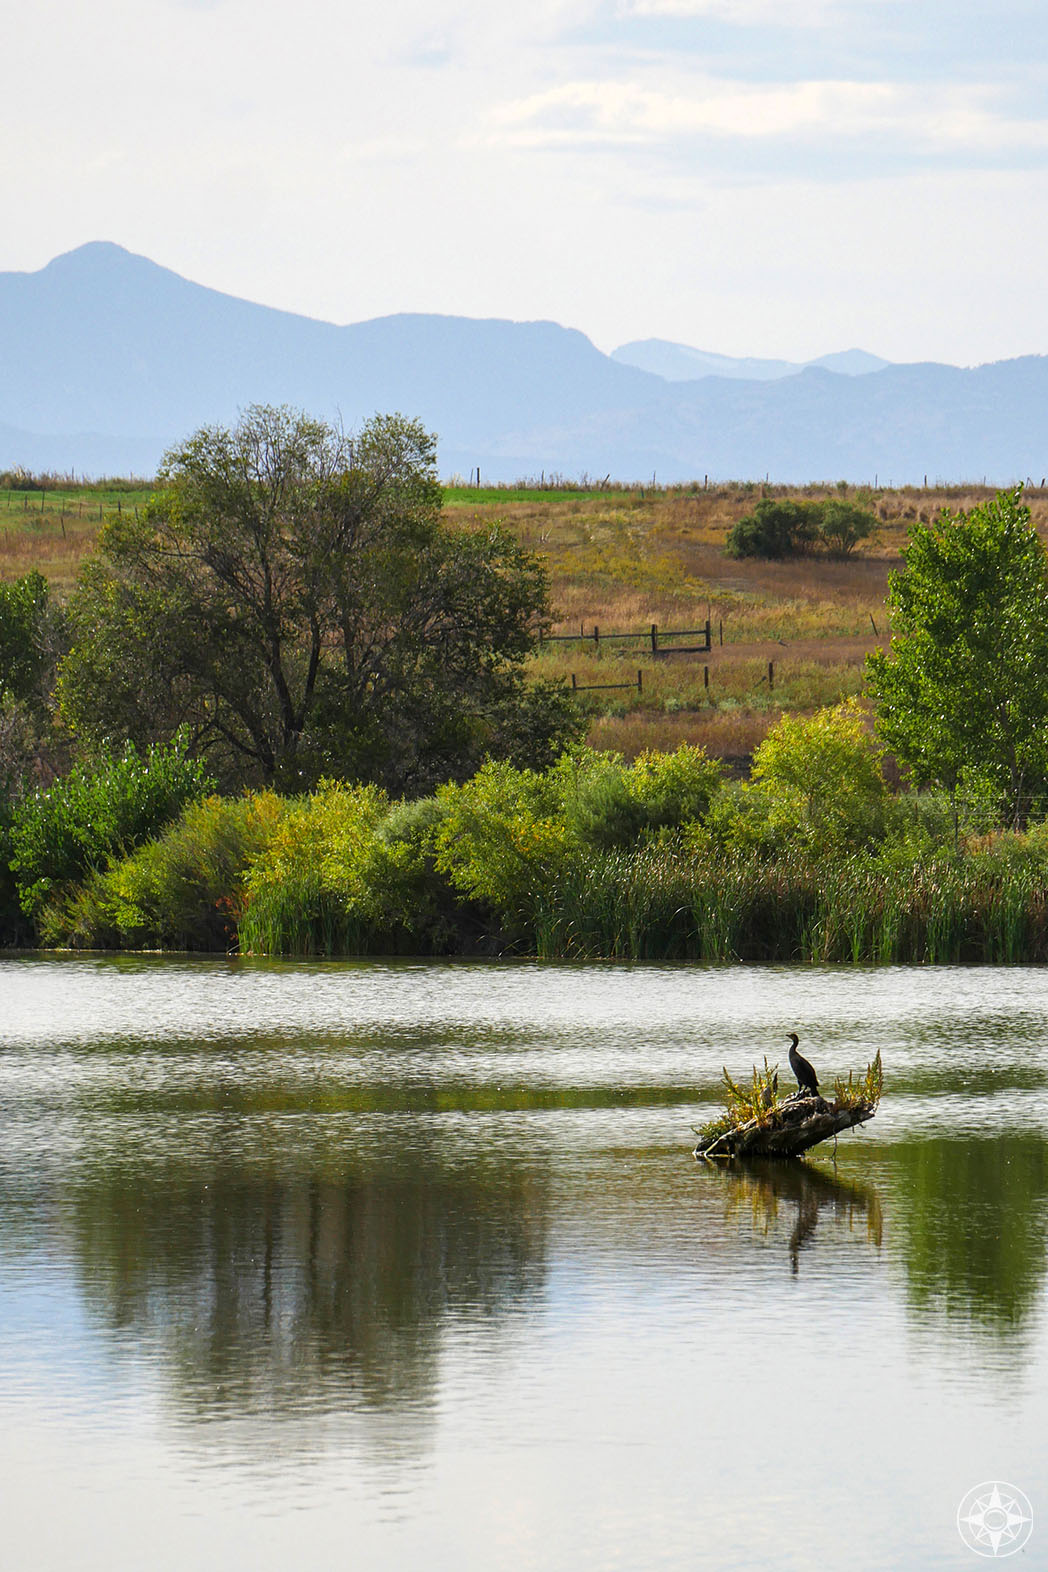 cormorant on pond with Rocky Mountains backdrop in St Vrain State Park, Colorado